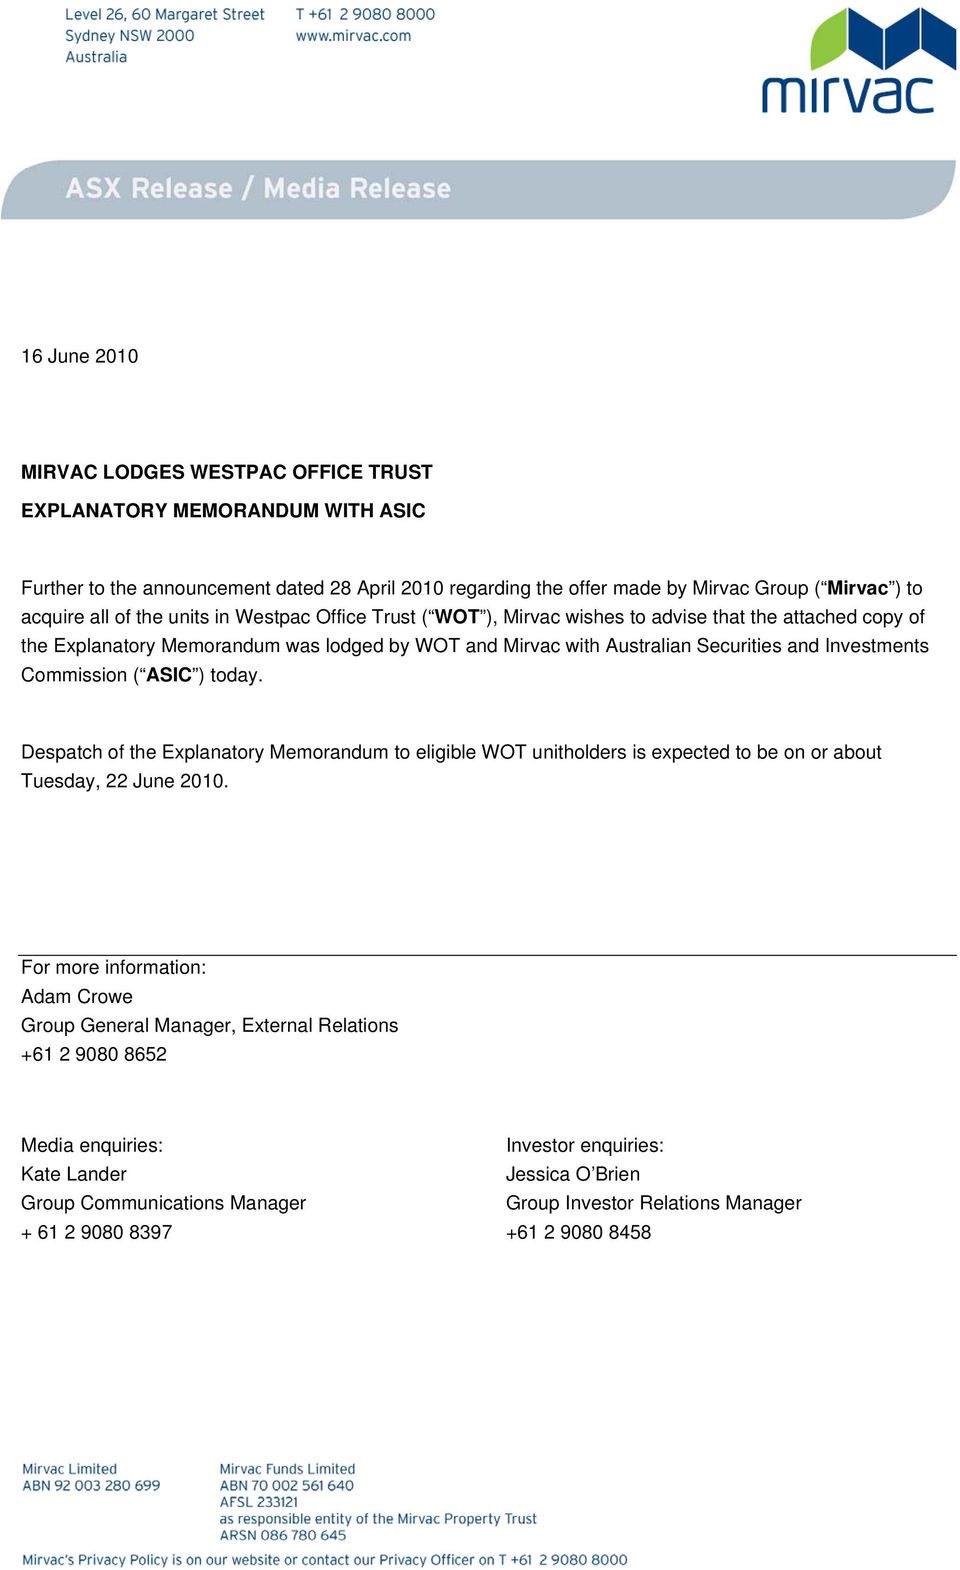 Commission ( ASIC ) today. Despatch of the Explanatory Memorandum to eligible WOT unitholders is expected to be on or about Tuesday, 22 June 2010.